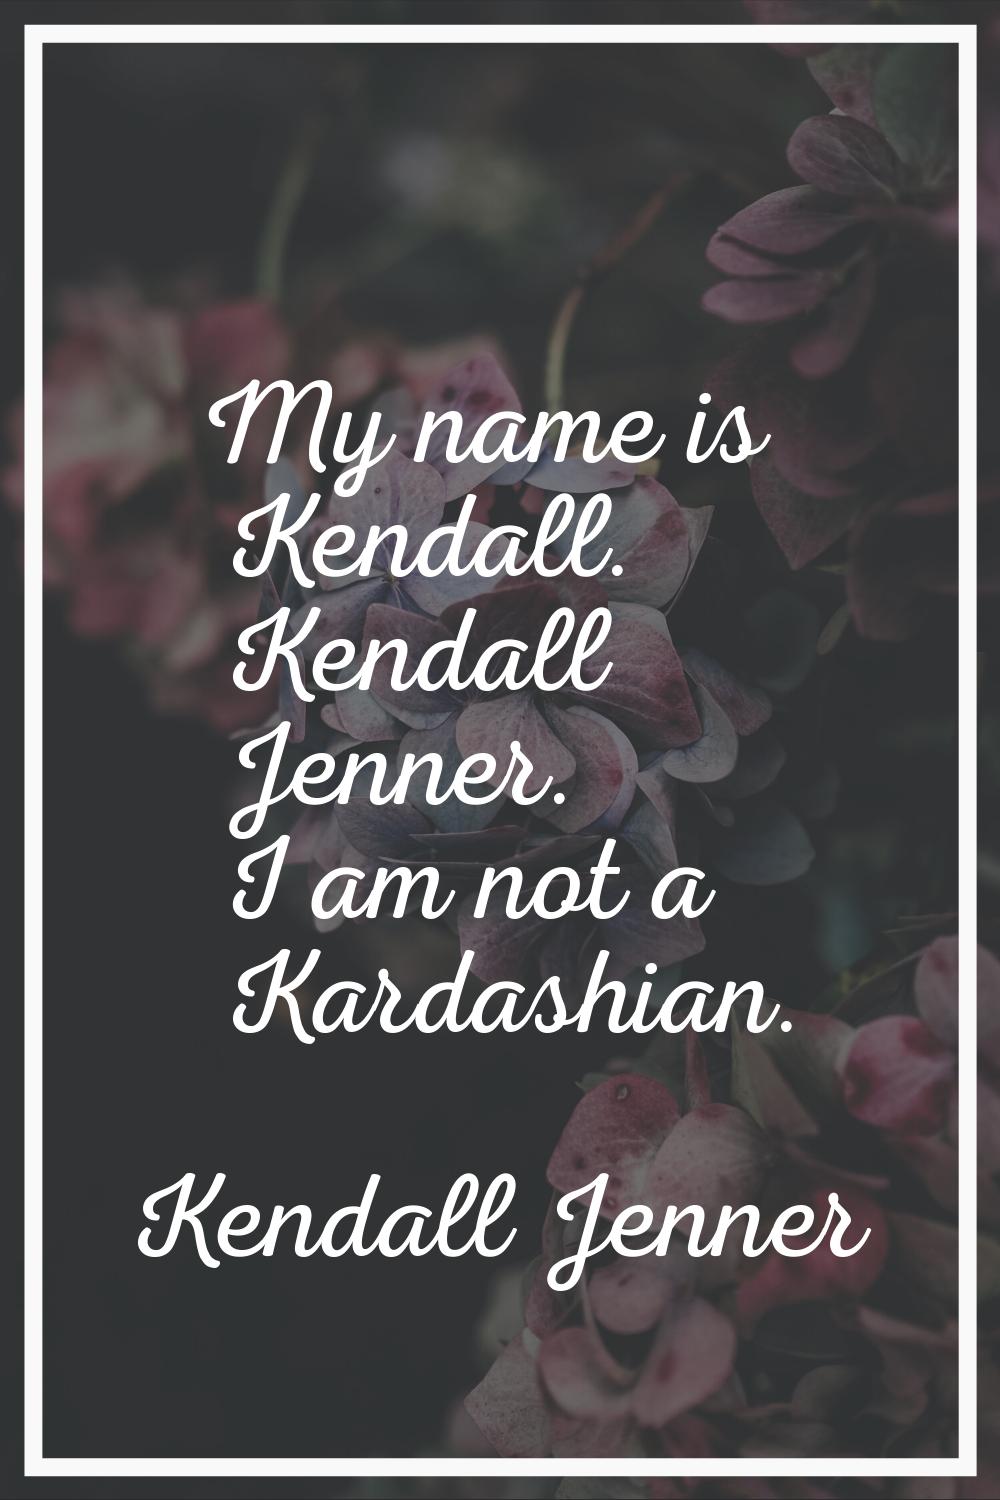 My name is Kendall. Kendall Jenner. I am not a Kardashian.